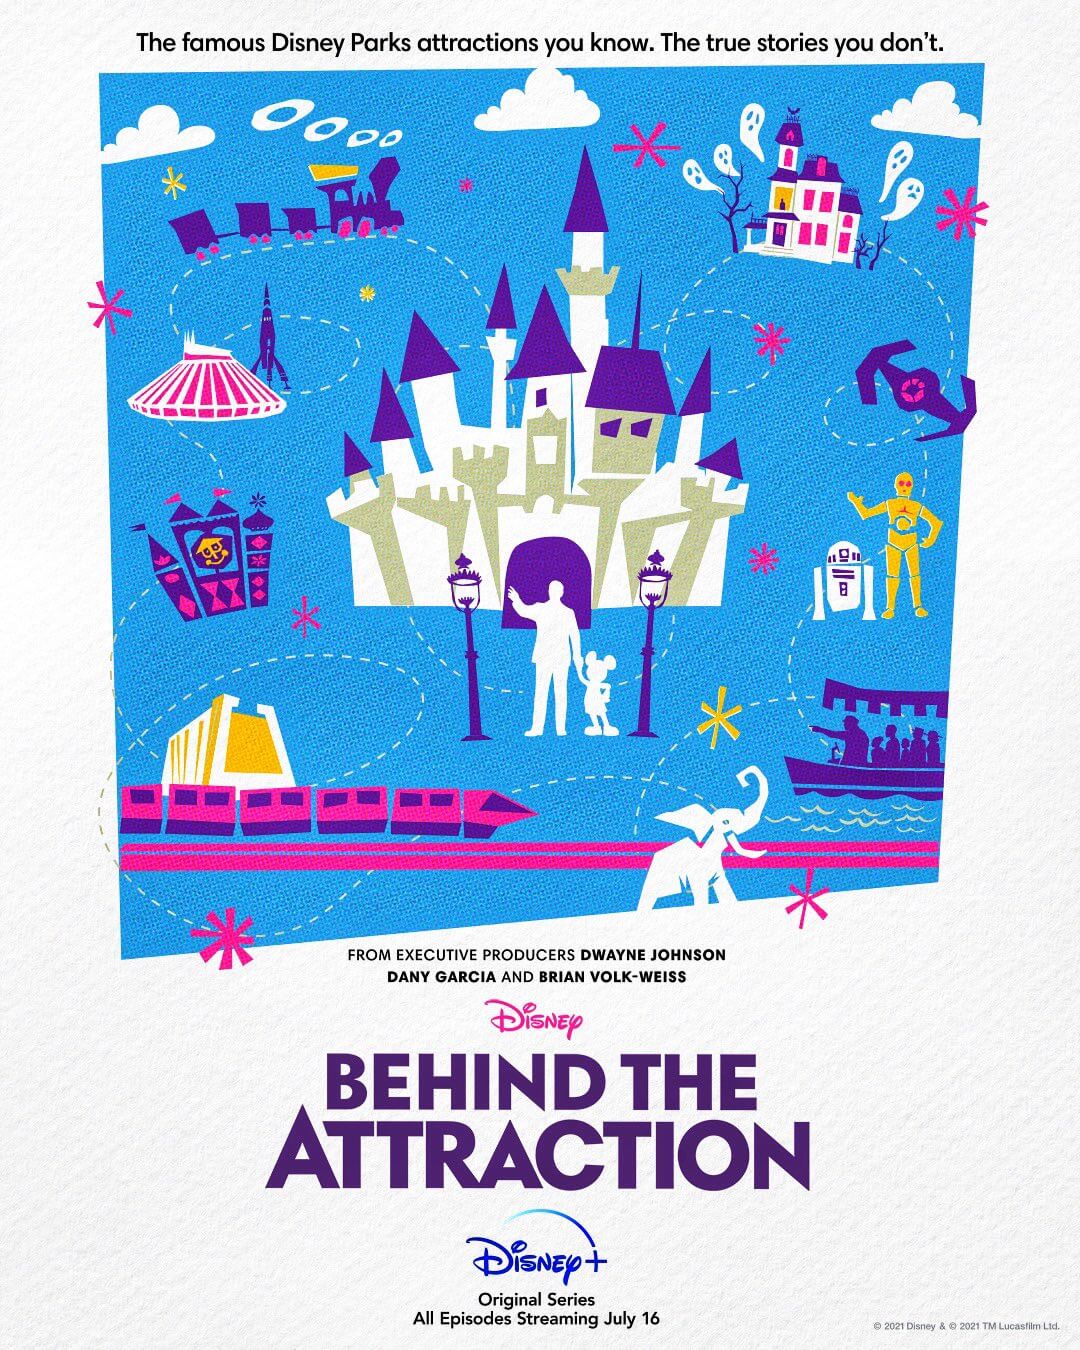 Behind the Attractions poster